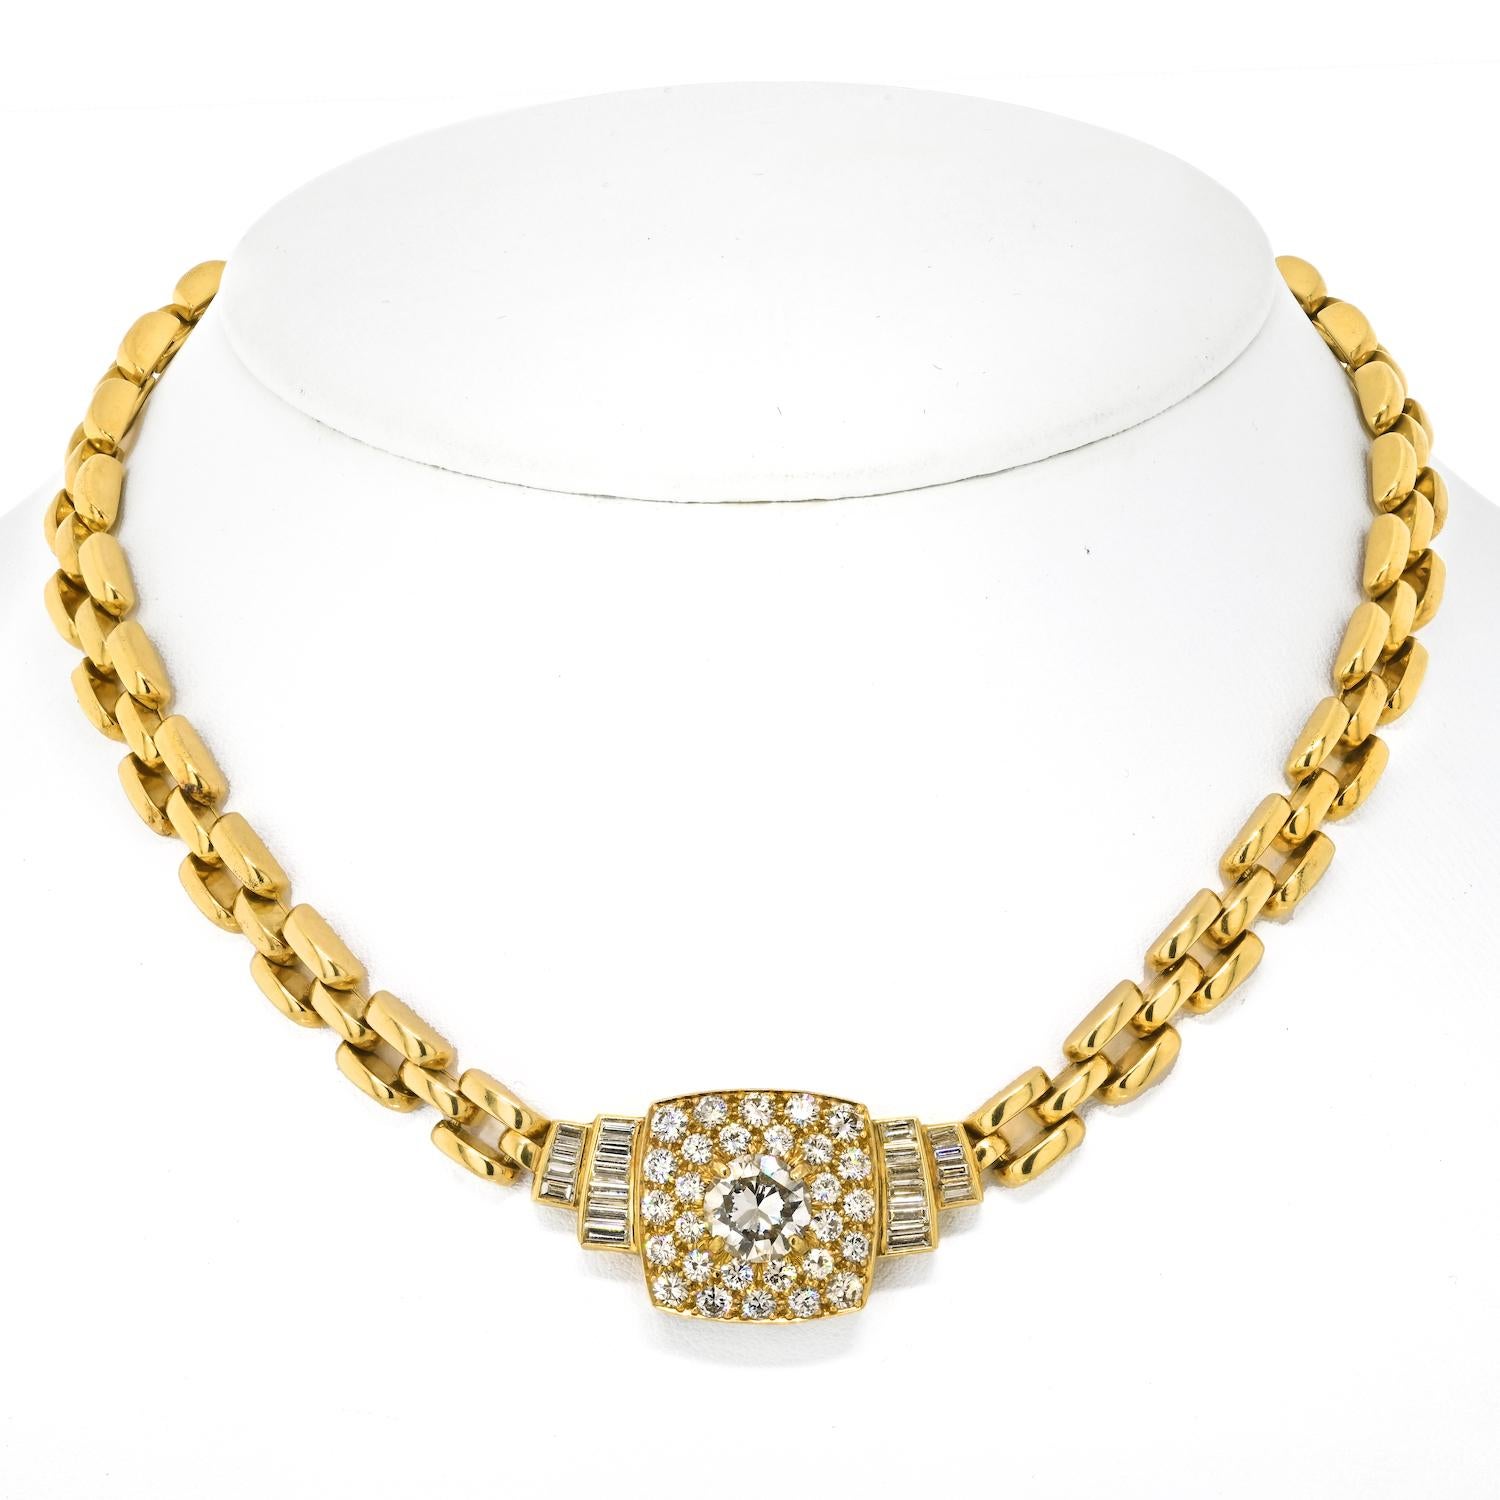 Step into the world of timeless elegance with this captivating estate yellow gold necklace by the legendary David Webb. 

Crafted with meticulous attention to detail, this 15-inch interlocking chain showcases a stunning pave-set diamond centerpiece